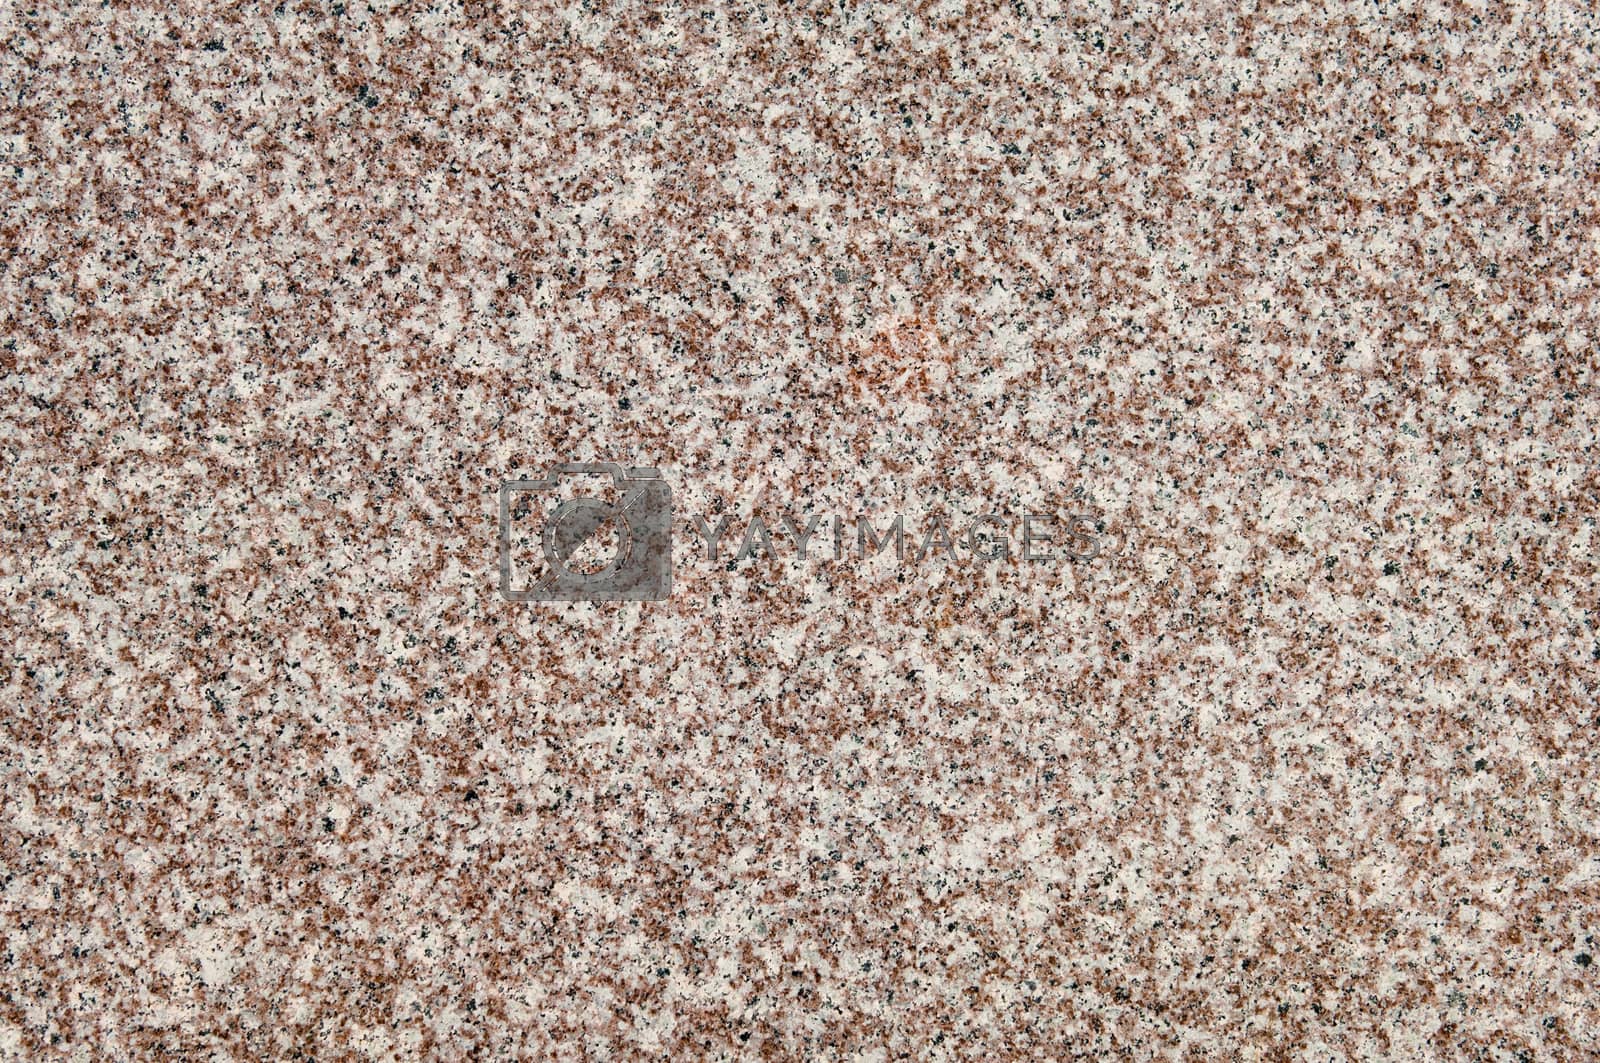 Royalty free image of Seamless granite textured background by horizonphoto